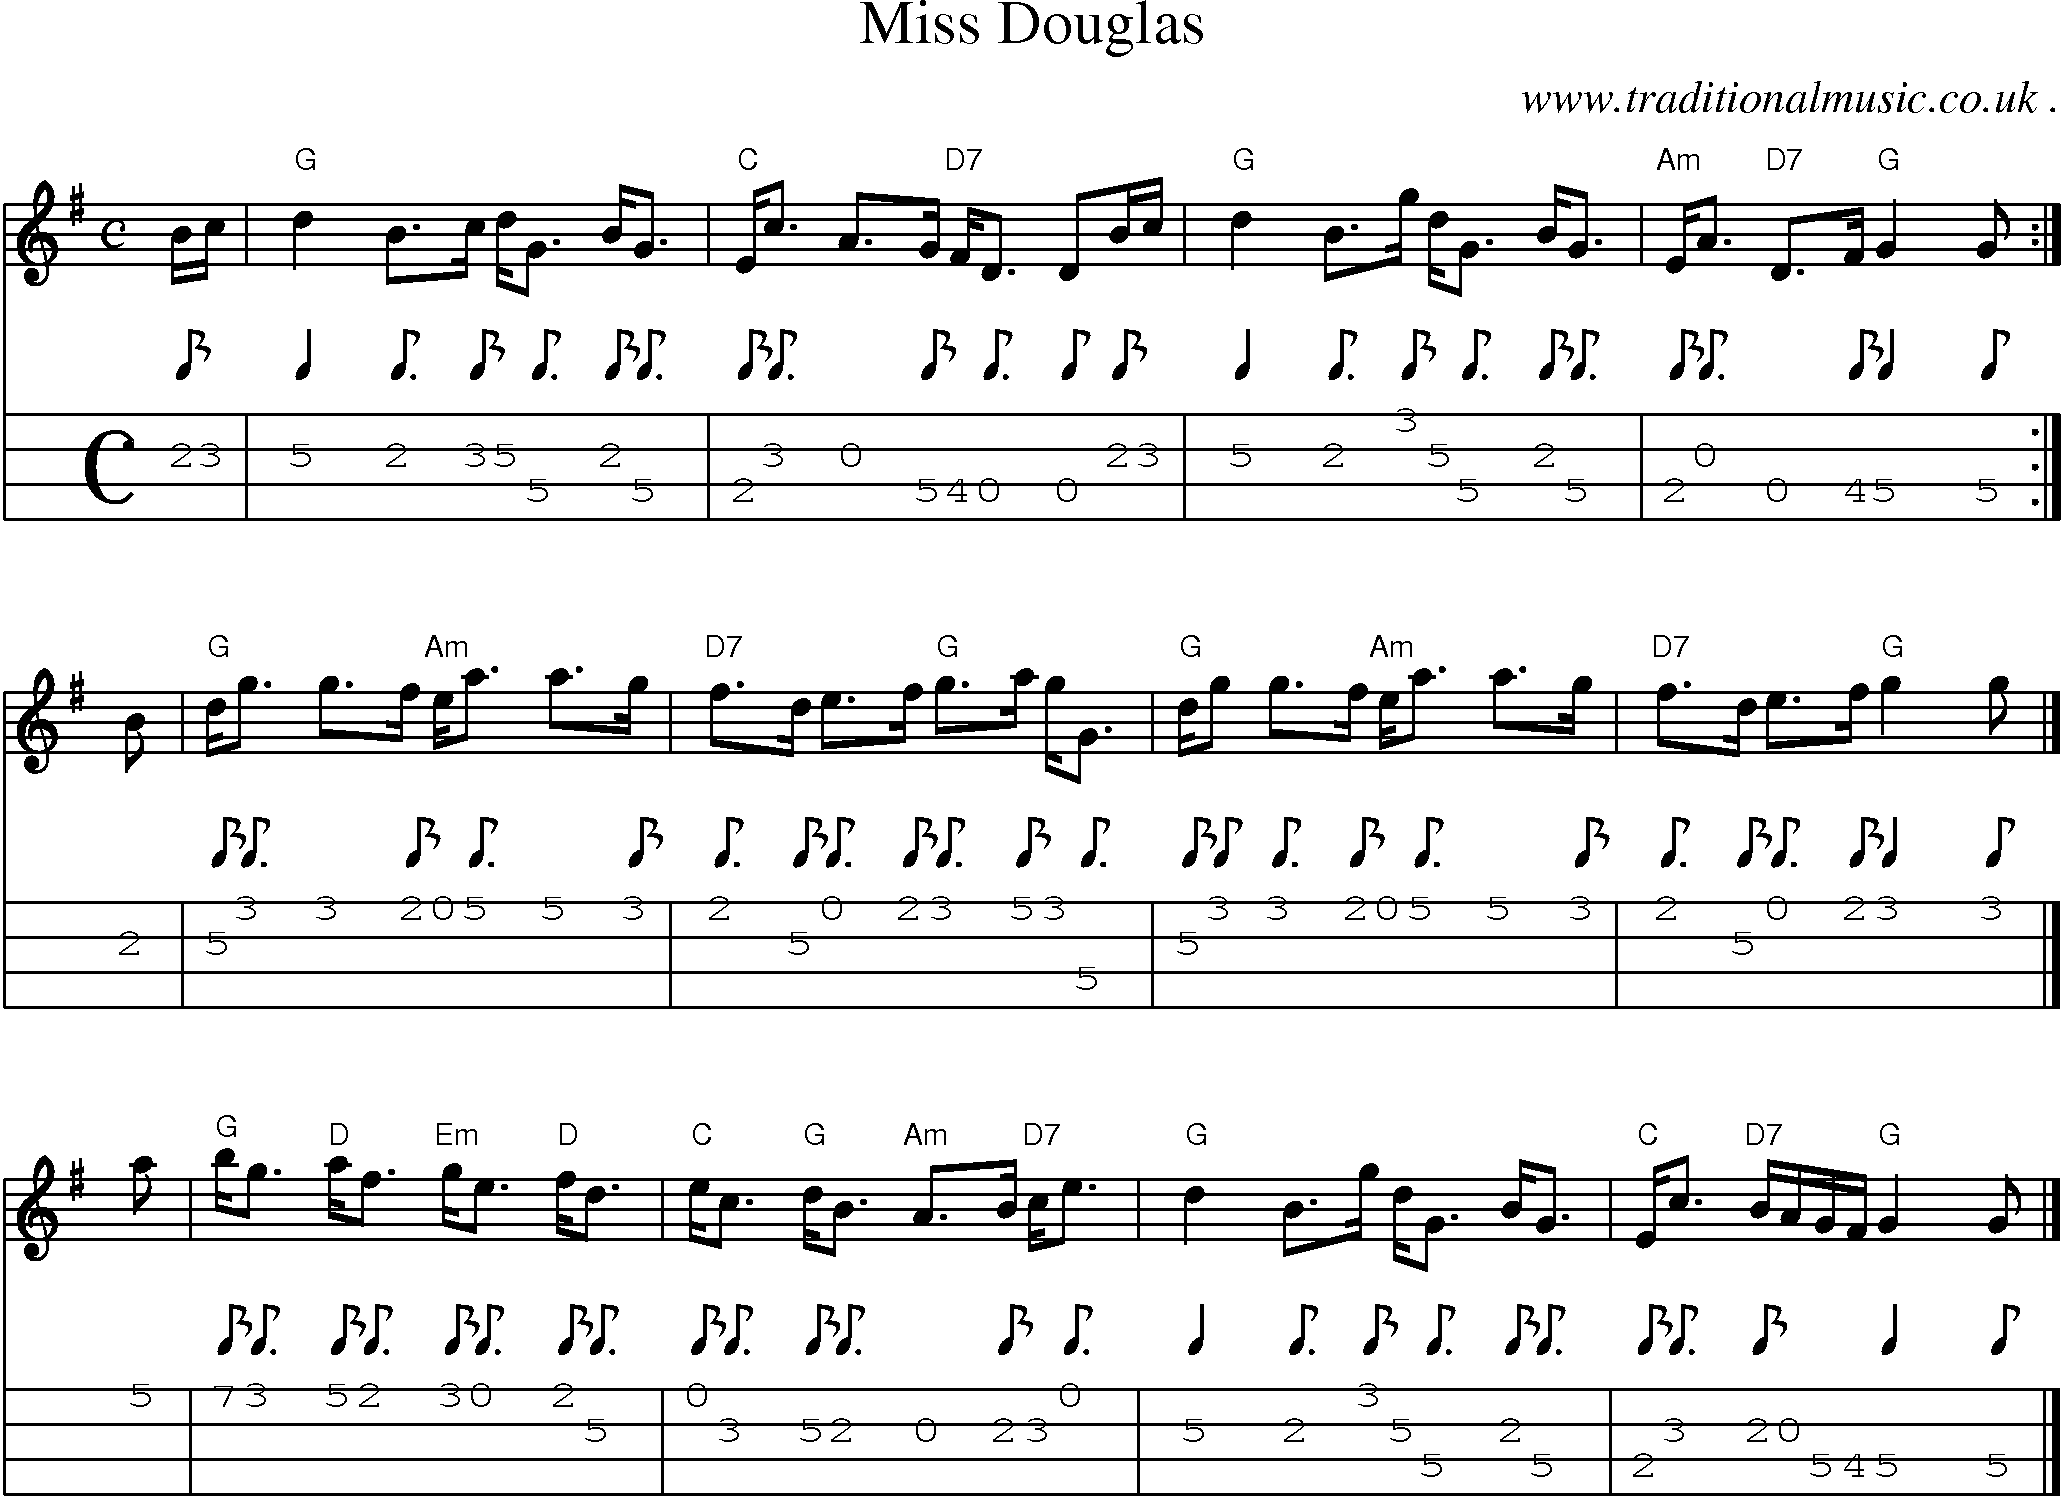 Sheet-music  score, Chords and Mandolin Tabs for Miss Douglas